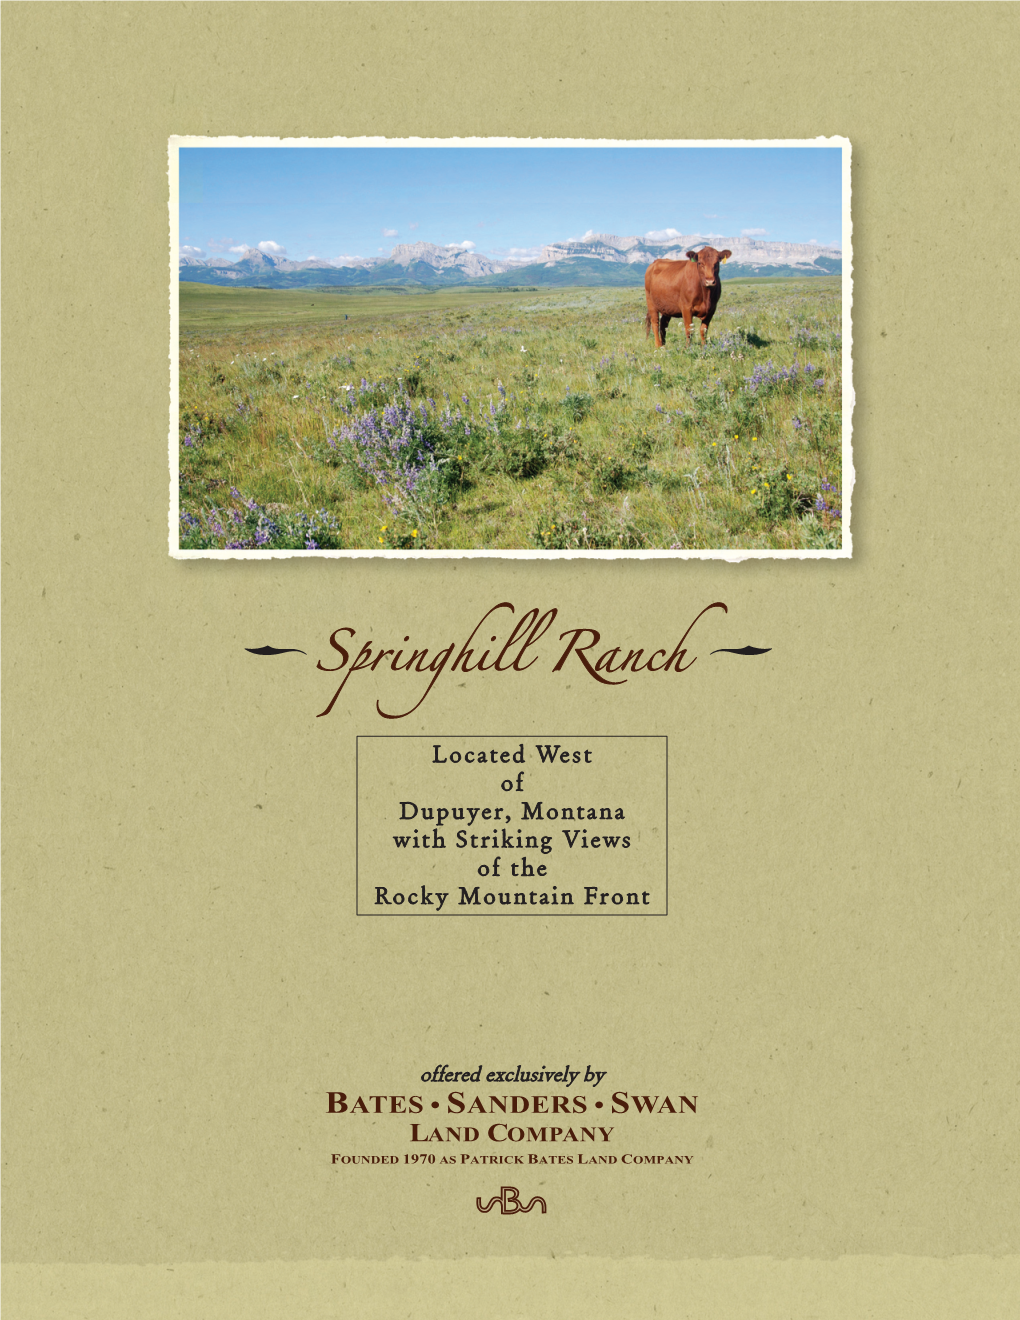 Springhill Ranch Is Situated About Five Miles East of Walling Reef, One of the Most Noted Land Forms of the Rocky Mountain Front